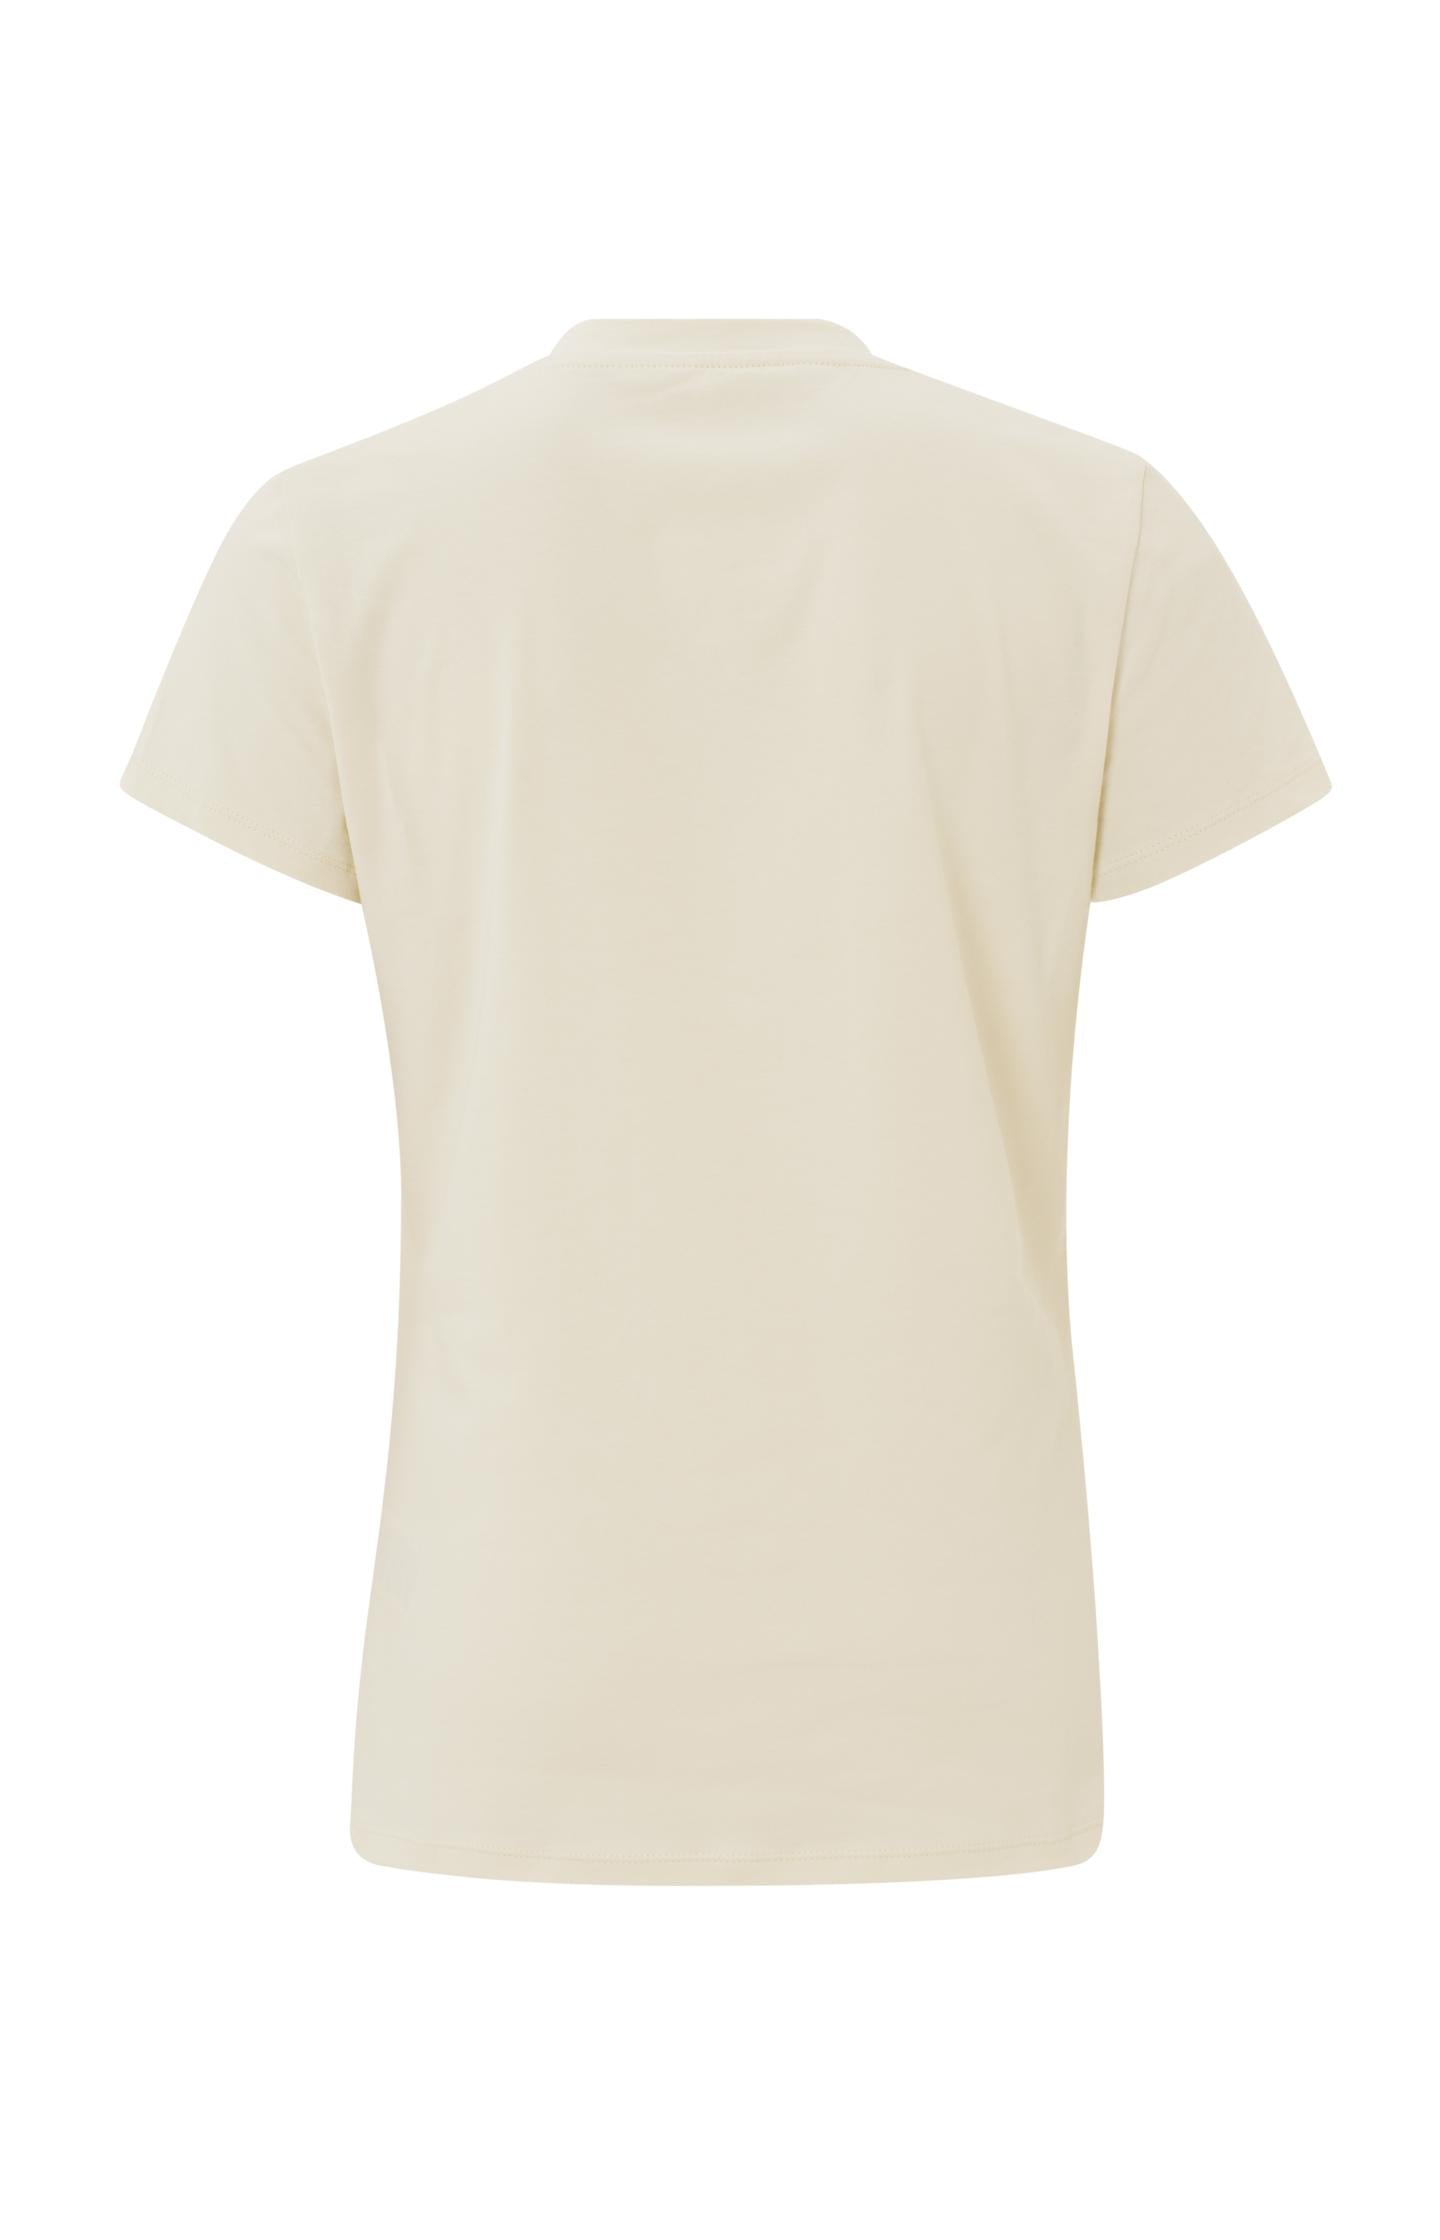 T-shirt with V-neck and short sleeves in regular fit